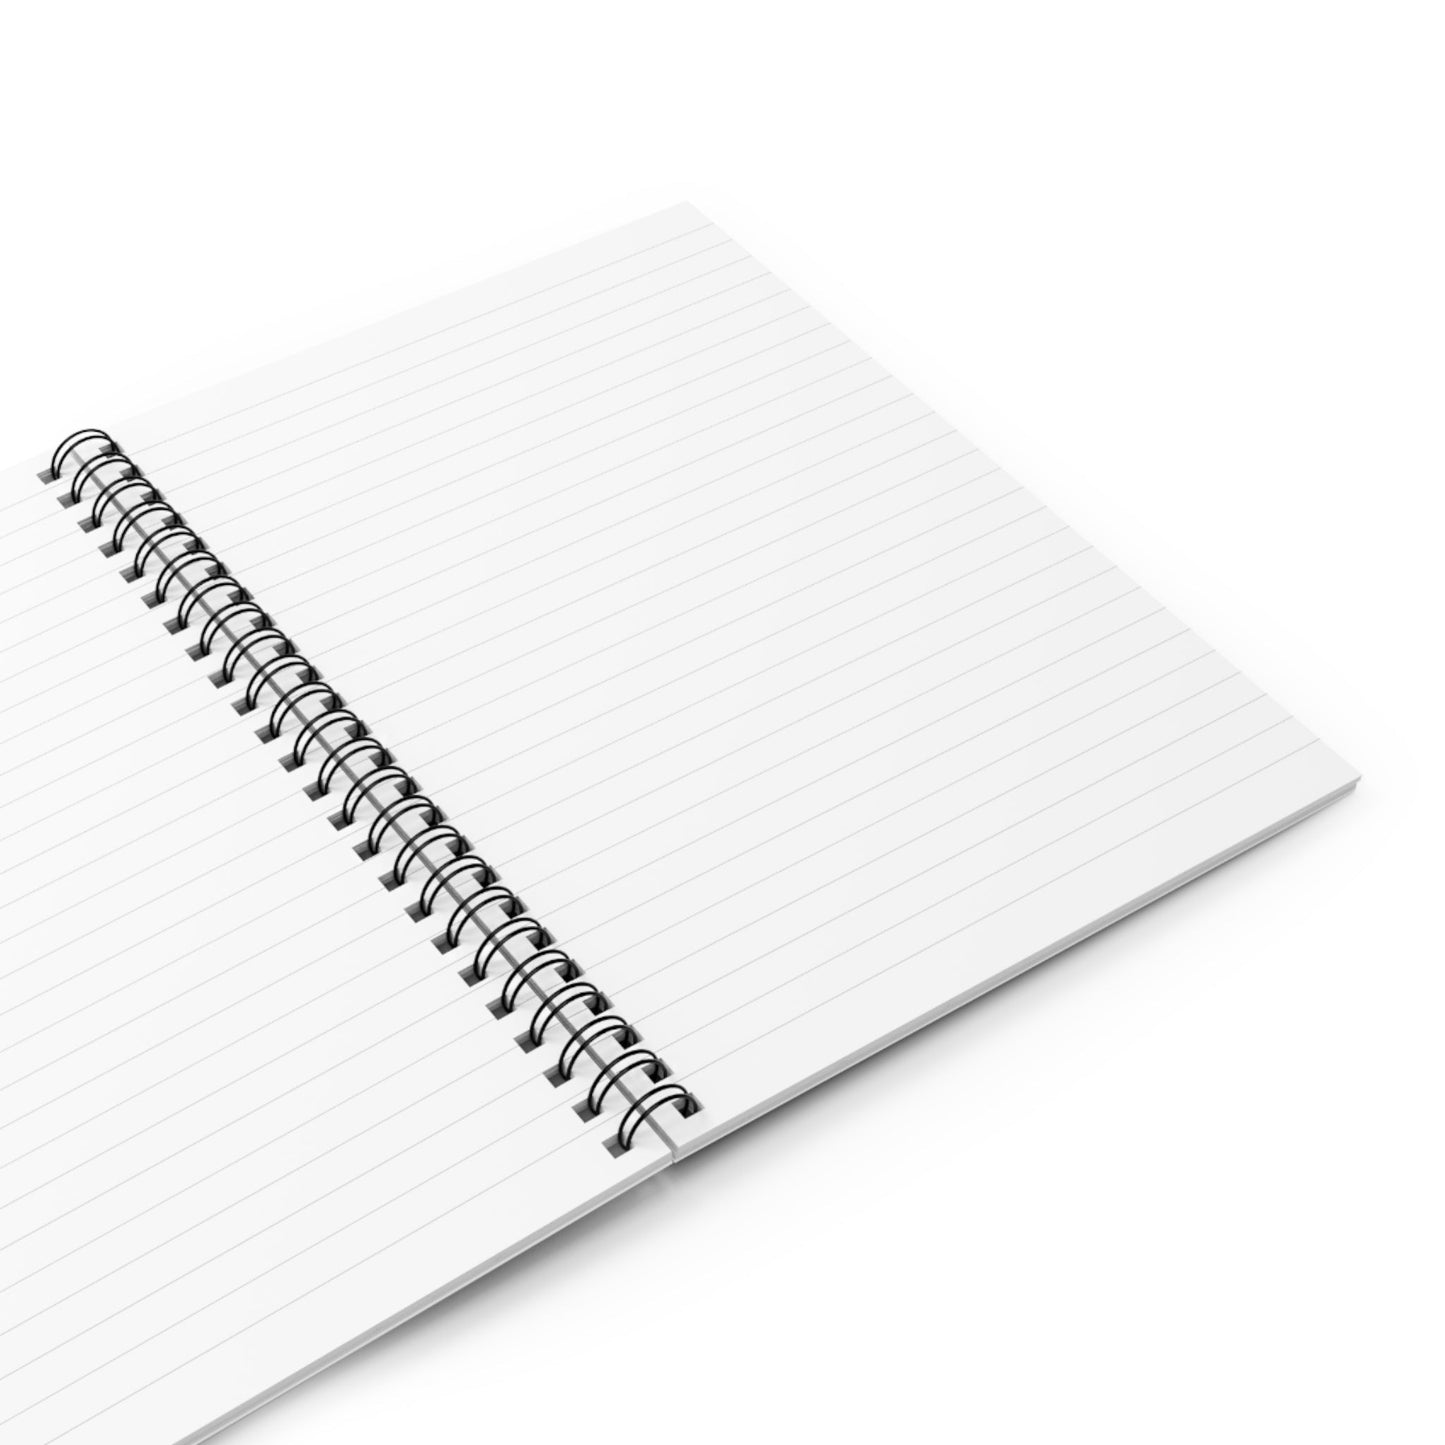 Fluffy Notebook Spiral Notebook - Ruled Line Paper products Printify 